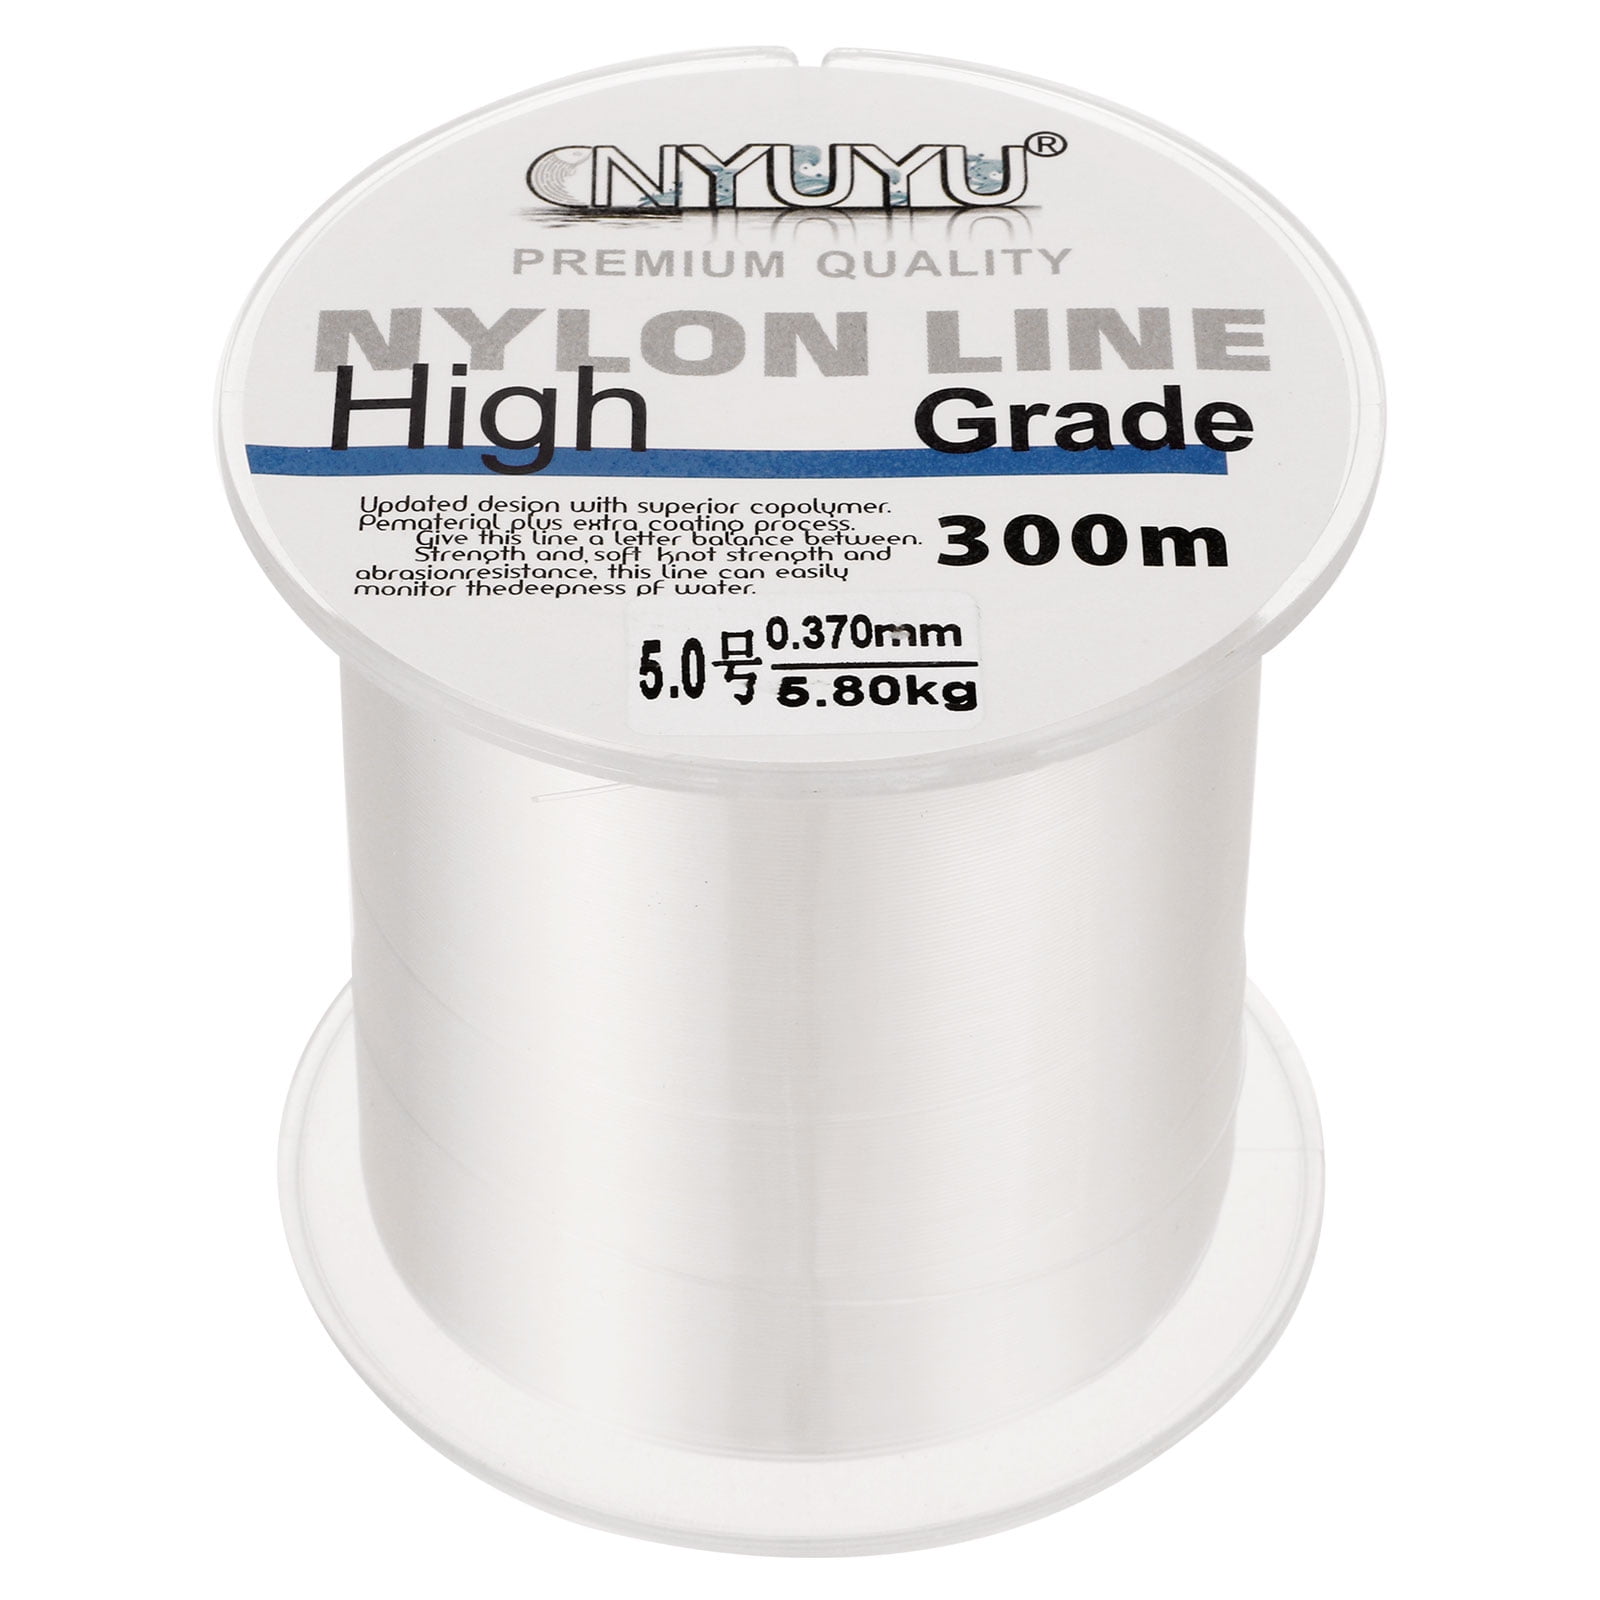 Uxcell 984FT 13lb 5.0# Fluorocarbon Coated Monofilament Nylon